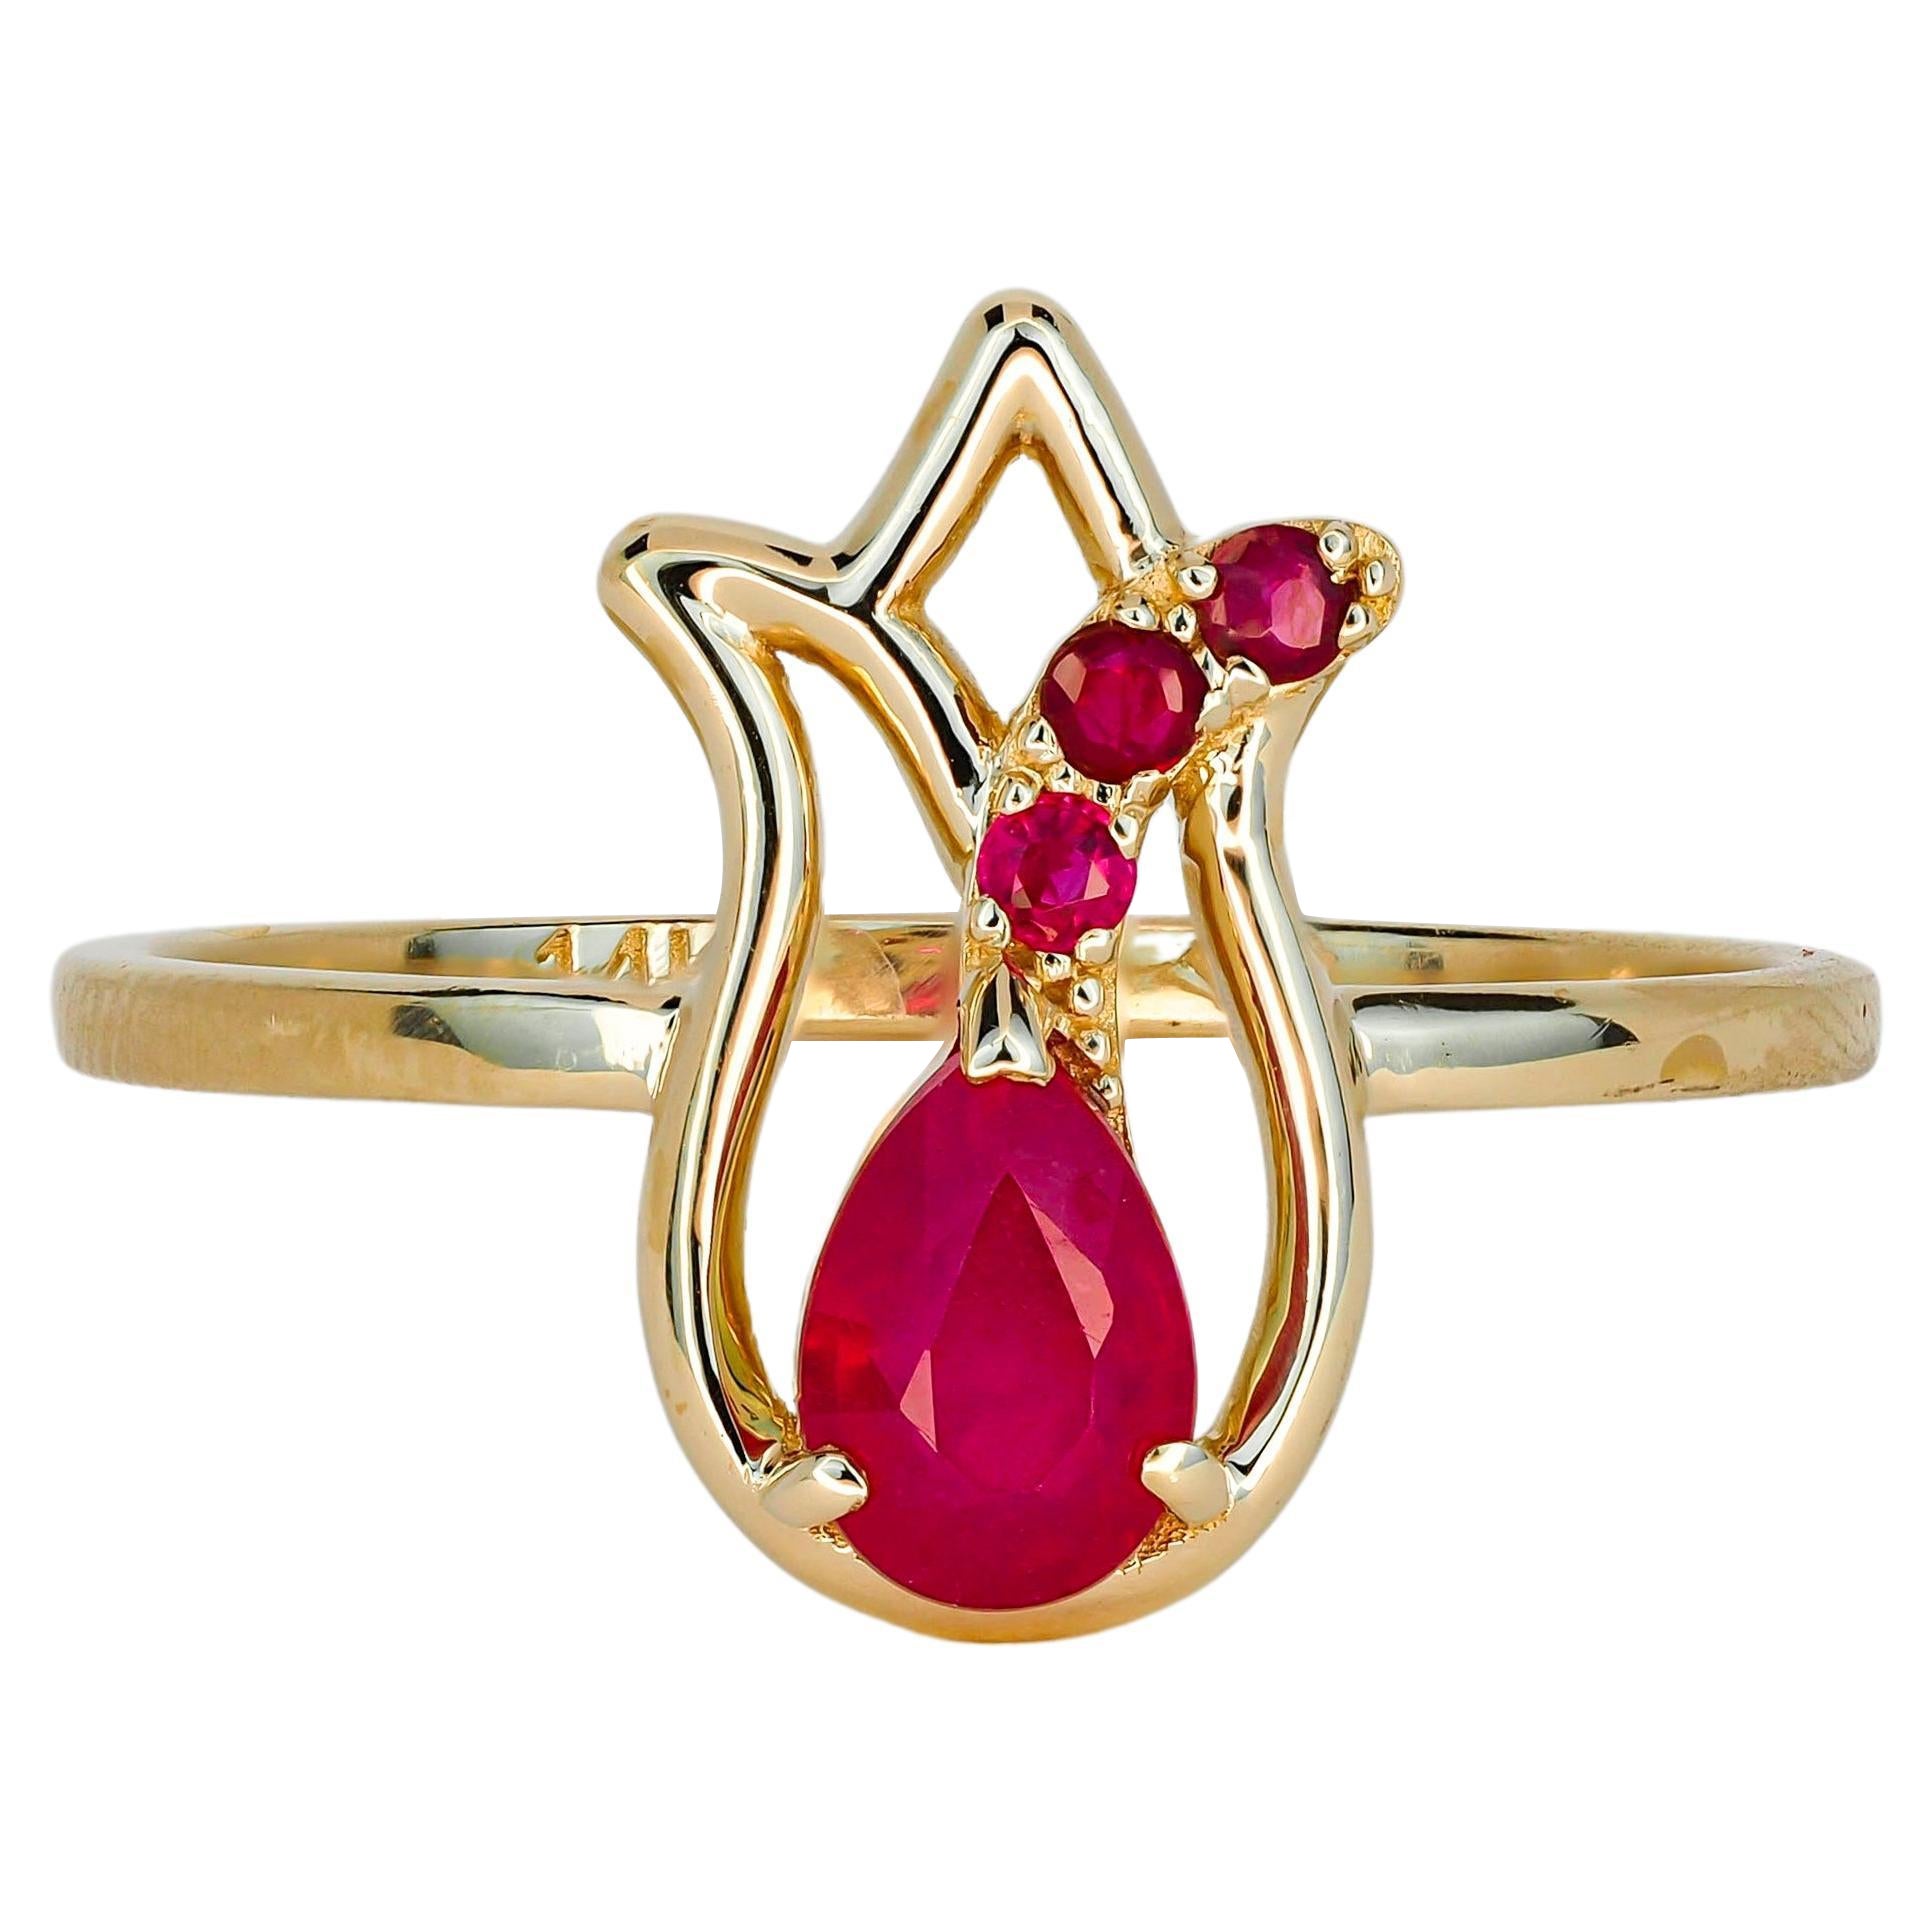 14 Karat Gold Ring with Ruby and Side Rubies, Gold Tulip Flower Ring